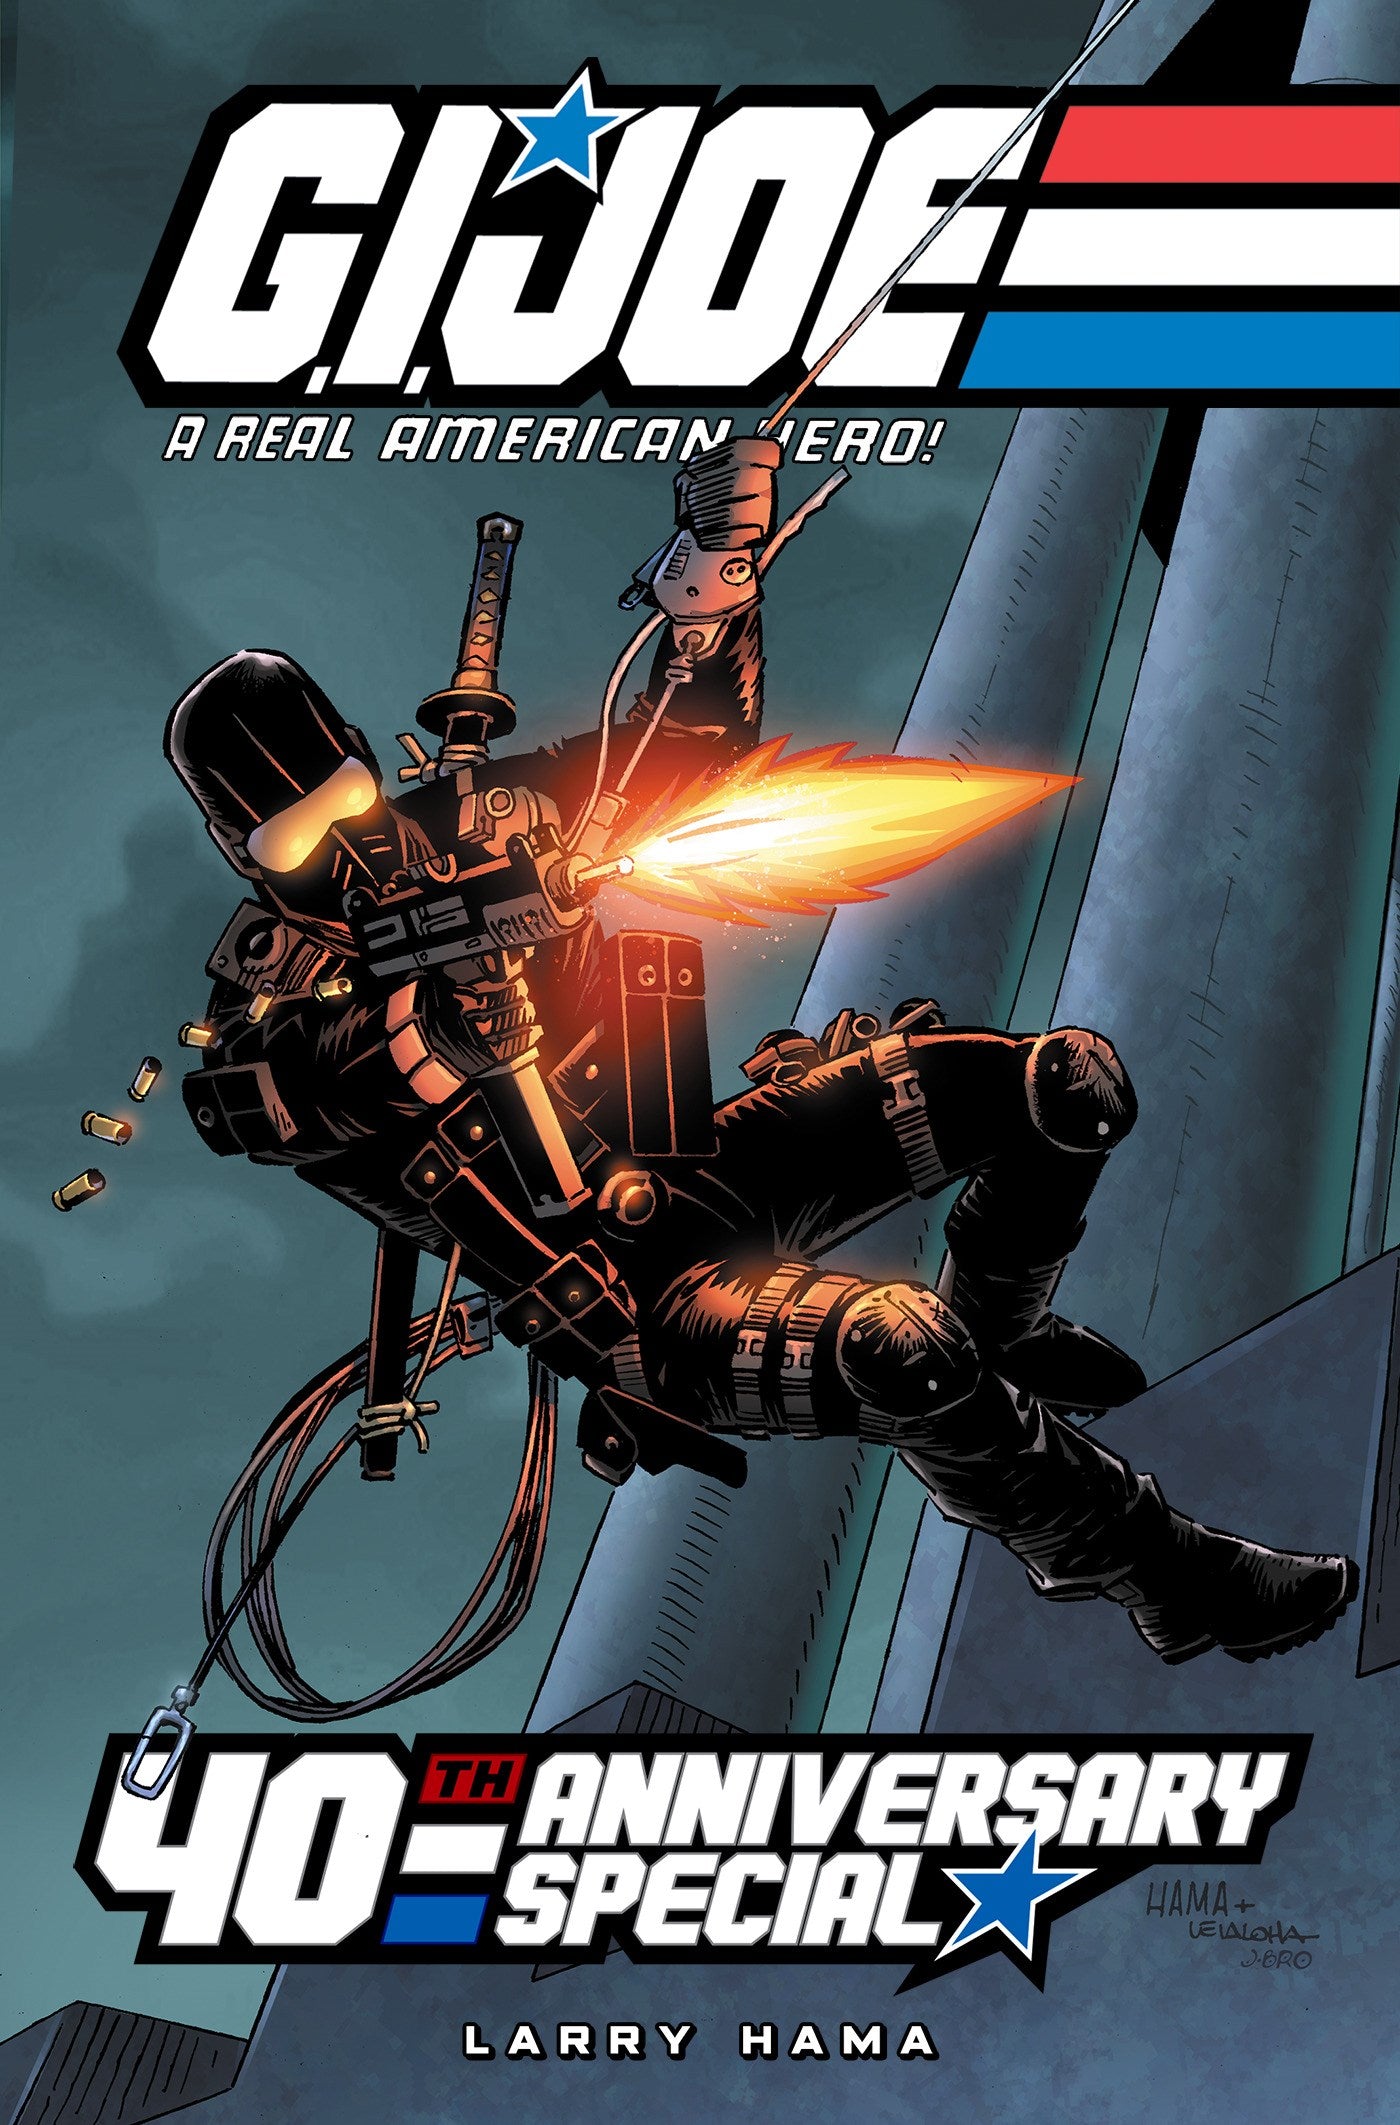 G.I. Joe: A Real American Hero: 40th Anniversary Special Deluxe Edition